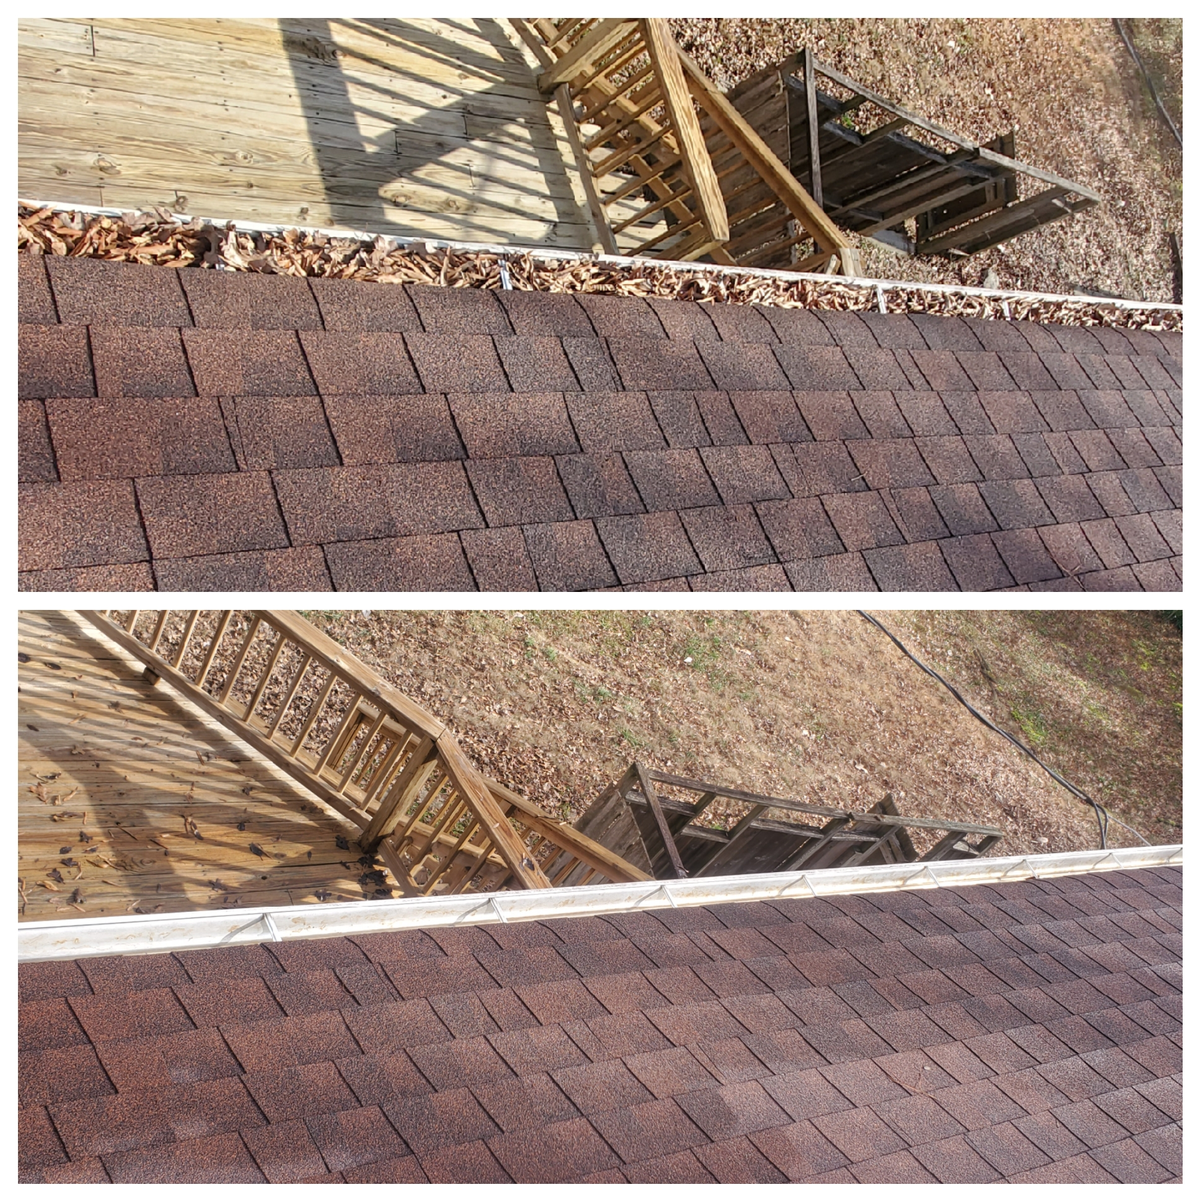 Gutter Cleaning for Shoals Pressure Washing in , 